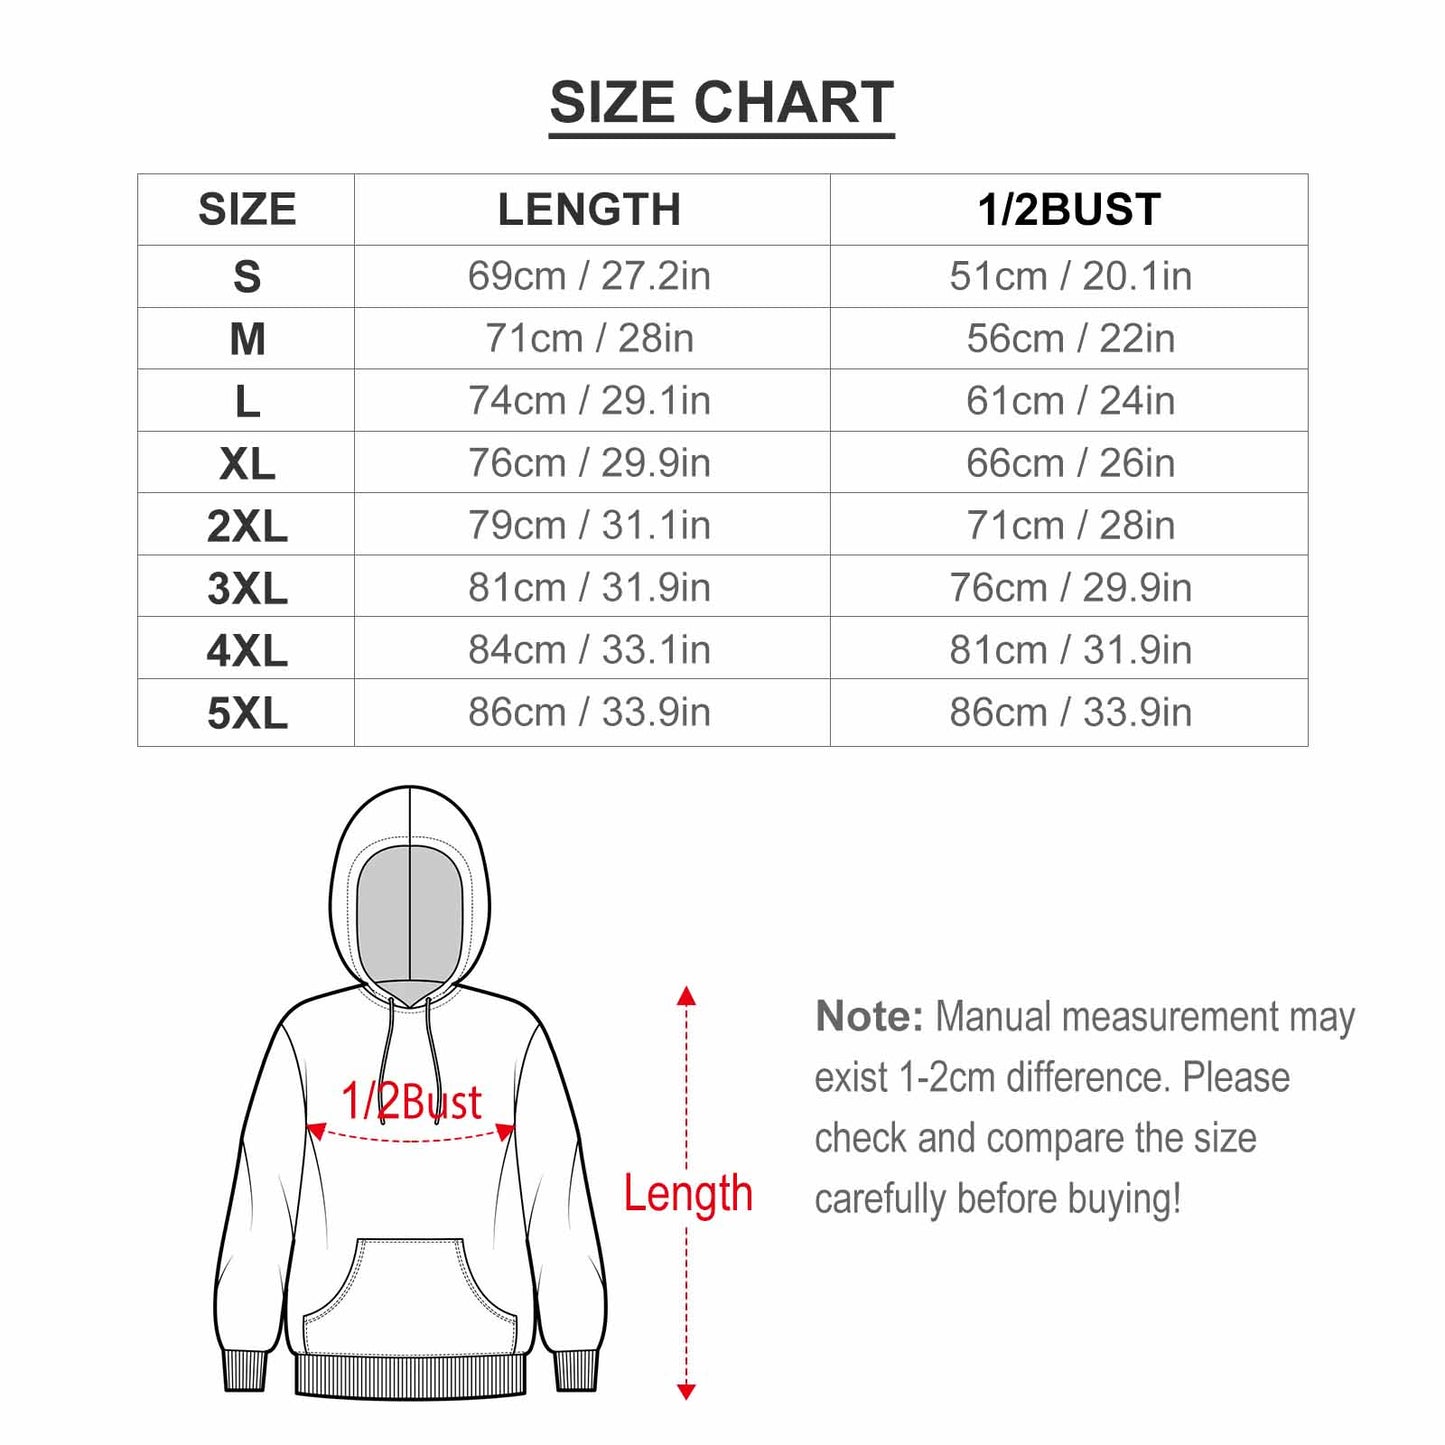 Heart Ribcage 250gsm Cotton Hoodie